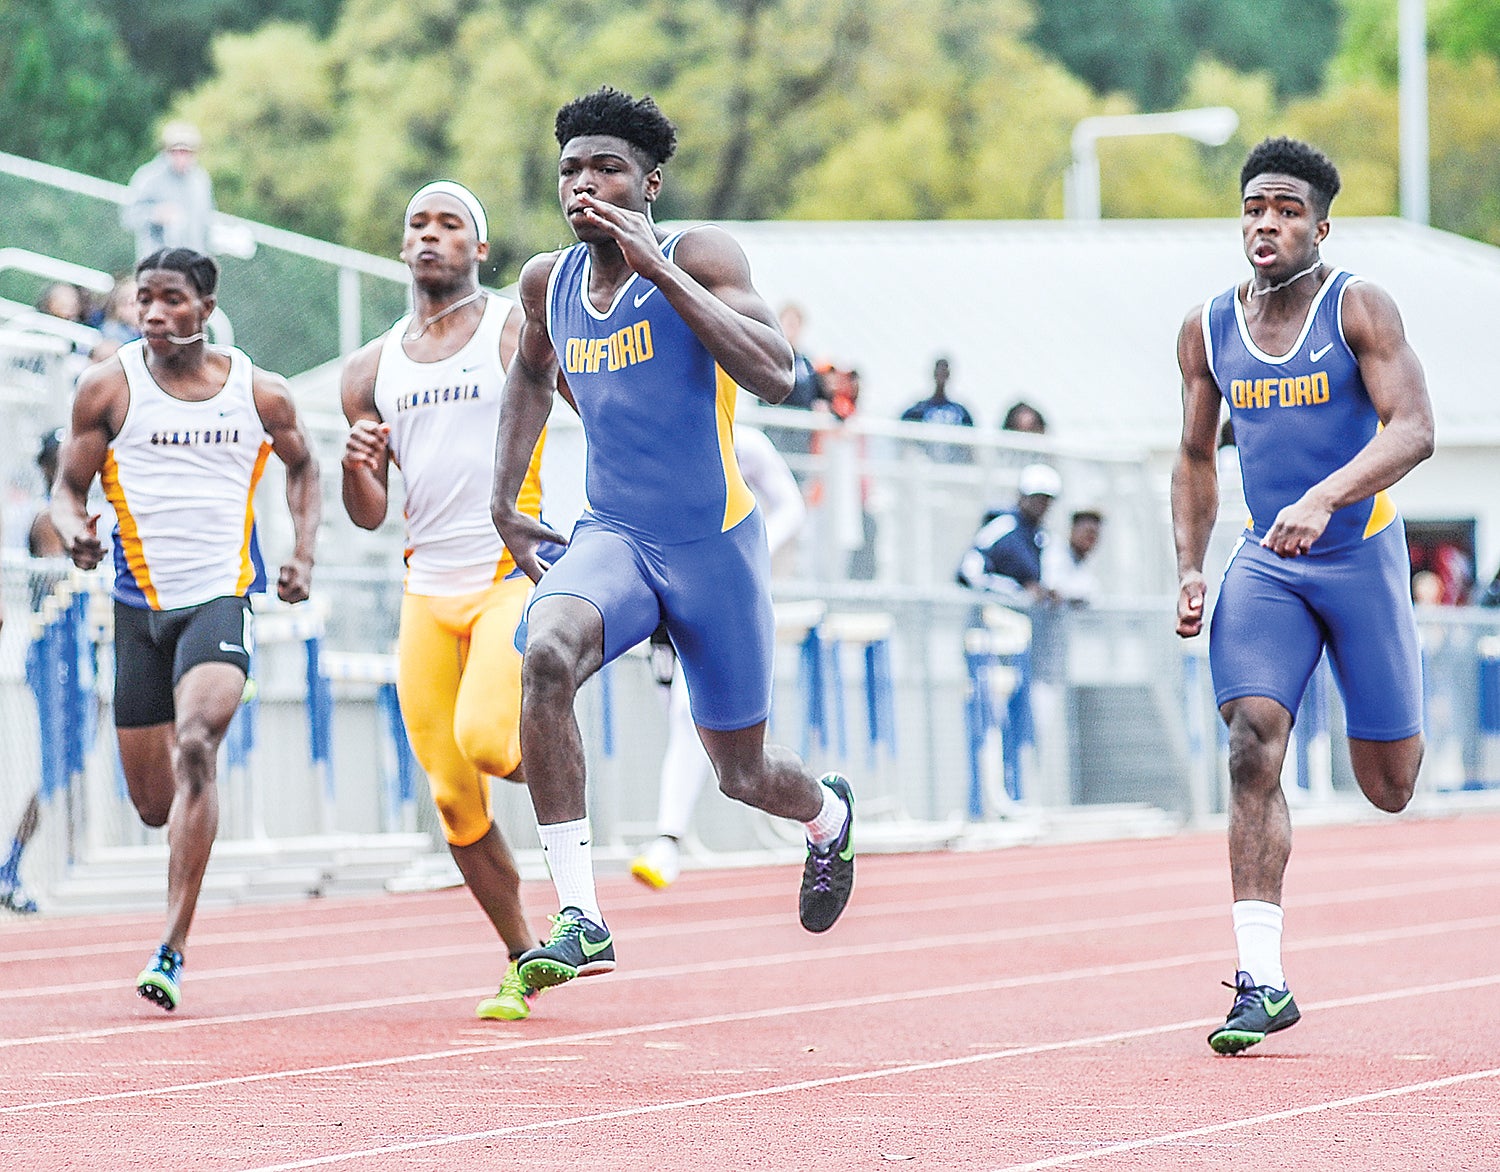 DOMINATING THE FIELD: Chargers run away with EAGLE Invitational